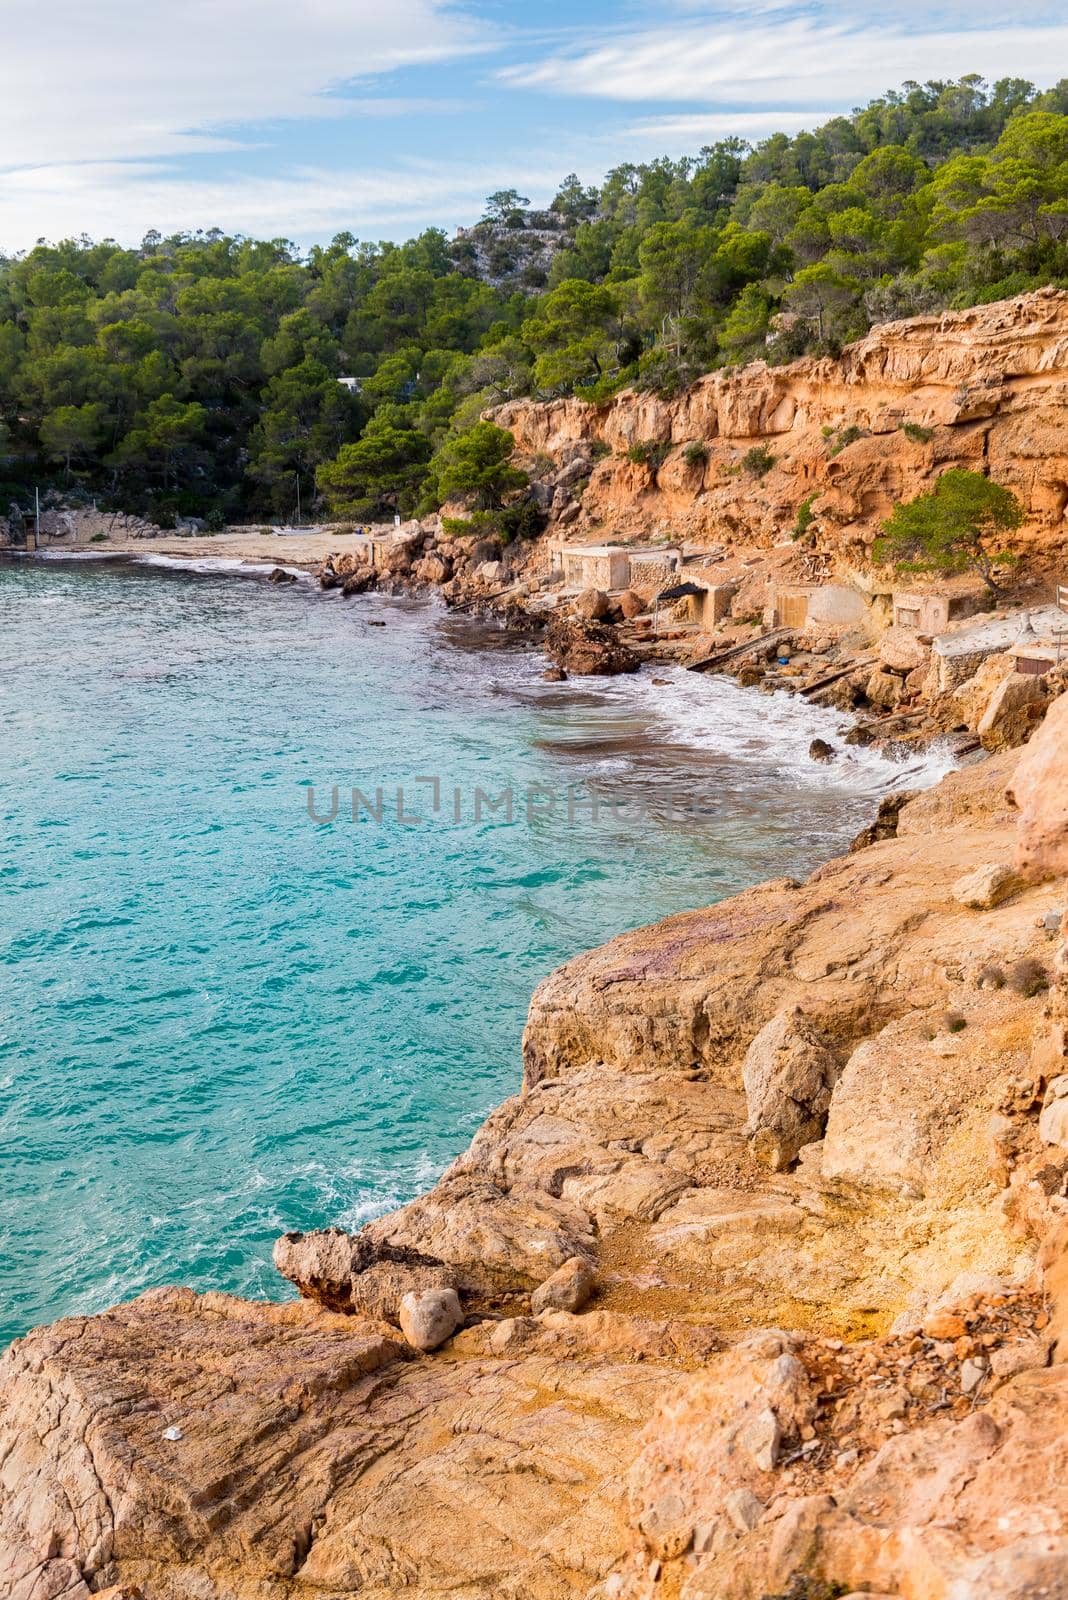 Cala Salada and Saladeta in san Antonio Abad at Balearic Islands Spain. Typical house for fishing boats and rocks. by martinscphoto